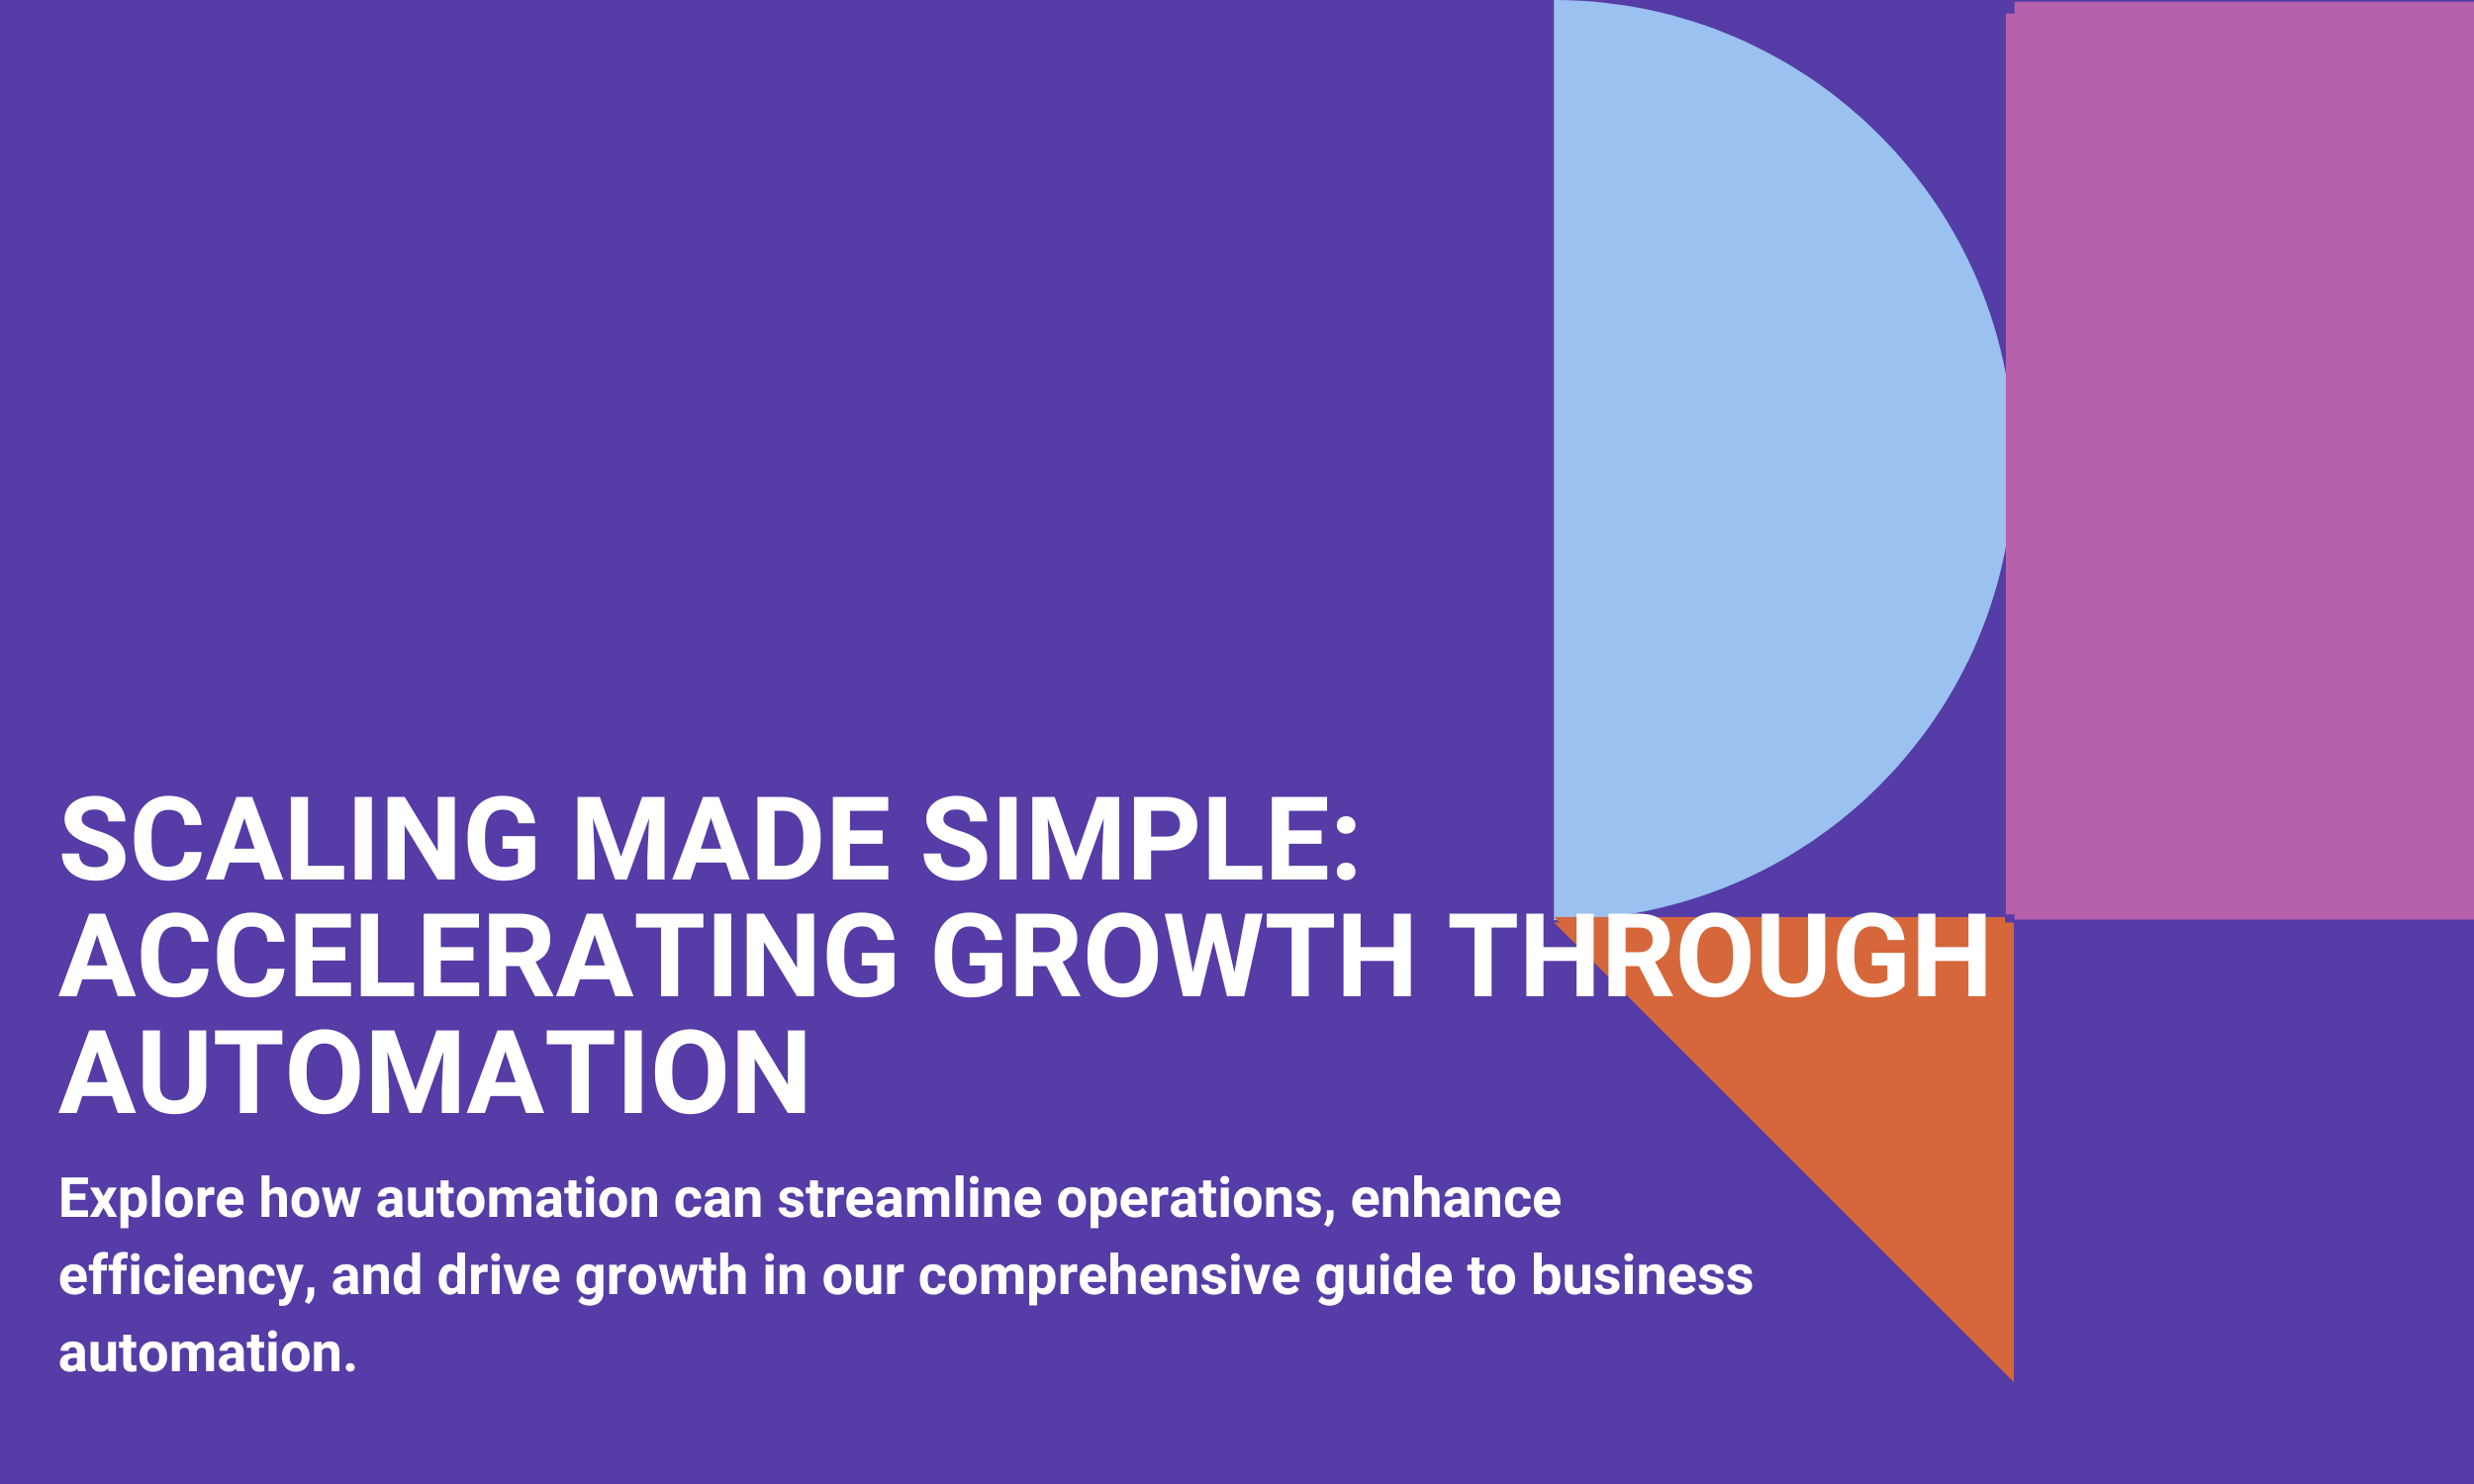 Scaling Made Simple: Accelerating Growth Through Automation